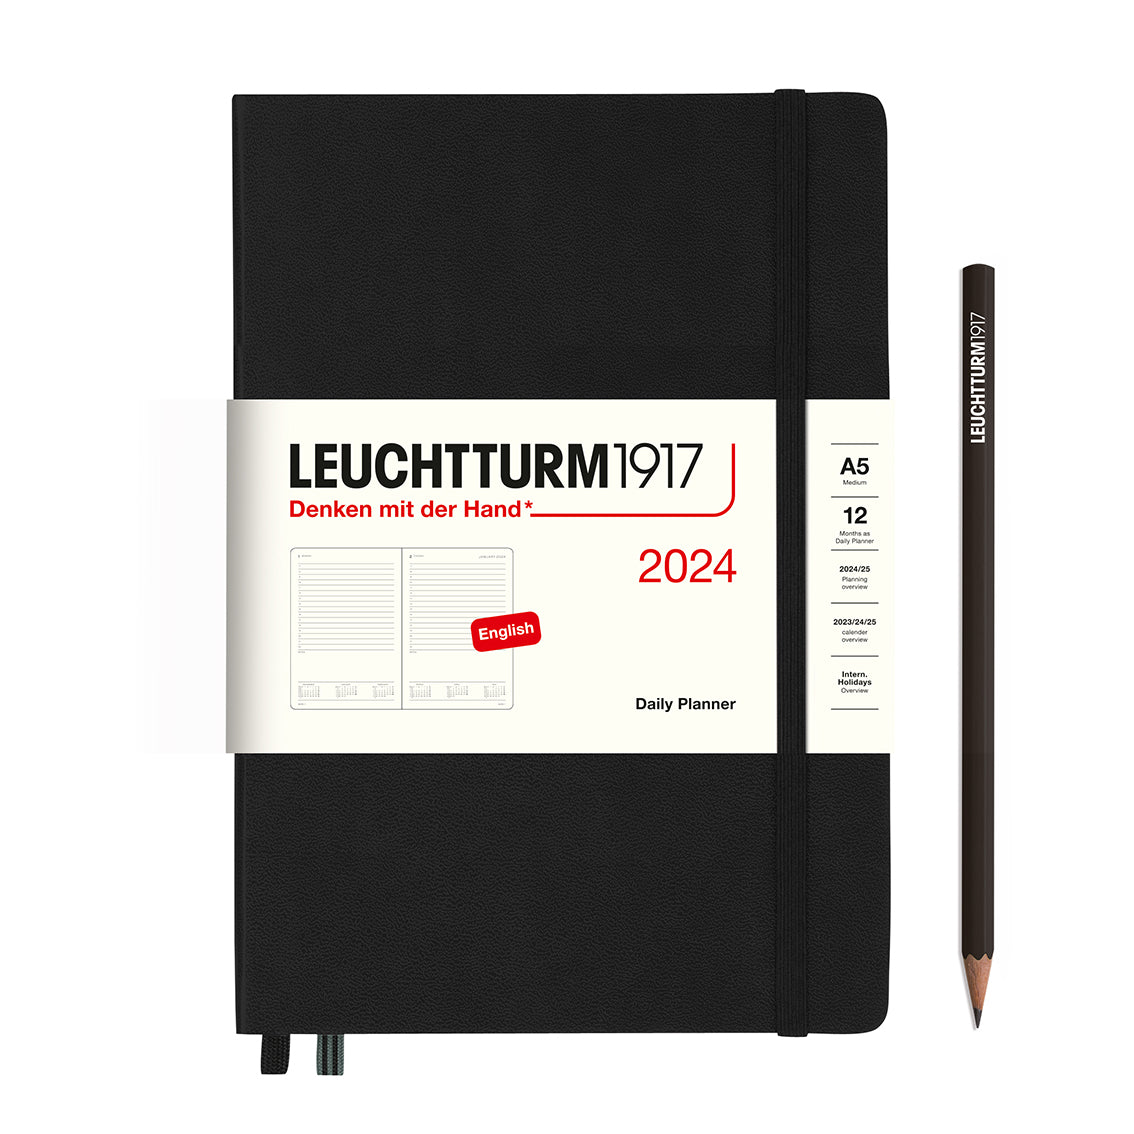 An image of a black planner with a black elastic band holding it together and a cream paper wrap around the middle stating the business name Leuchtturm1917, that it is for the year 2024, it is a daily planner, is A5 in size and an English language version. It has an image on the wrap showing the inside layout which is 1 day per page. A black pencil is shown at the side of the planner.